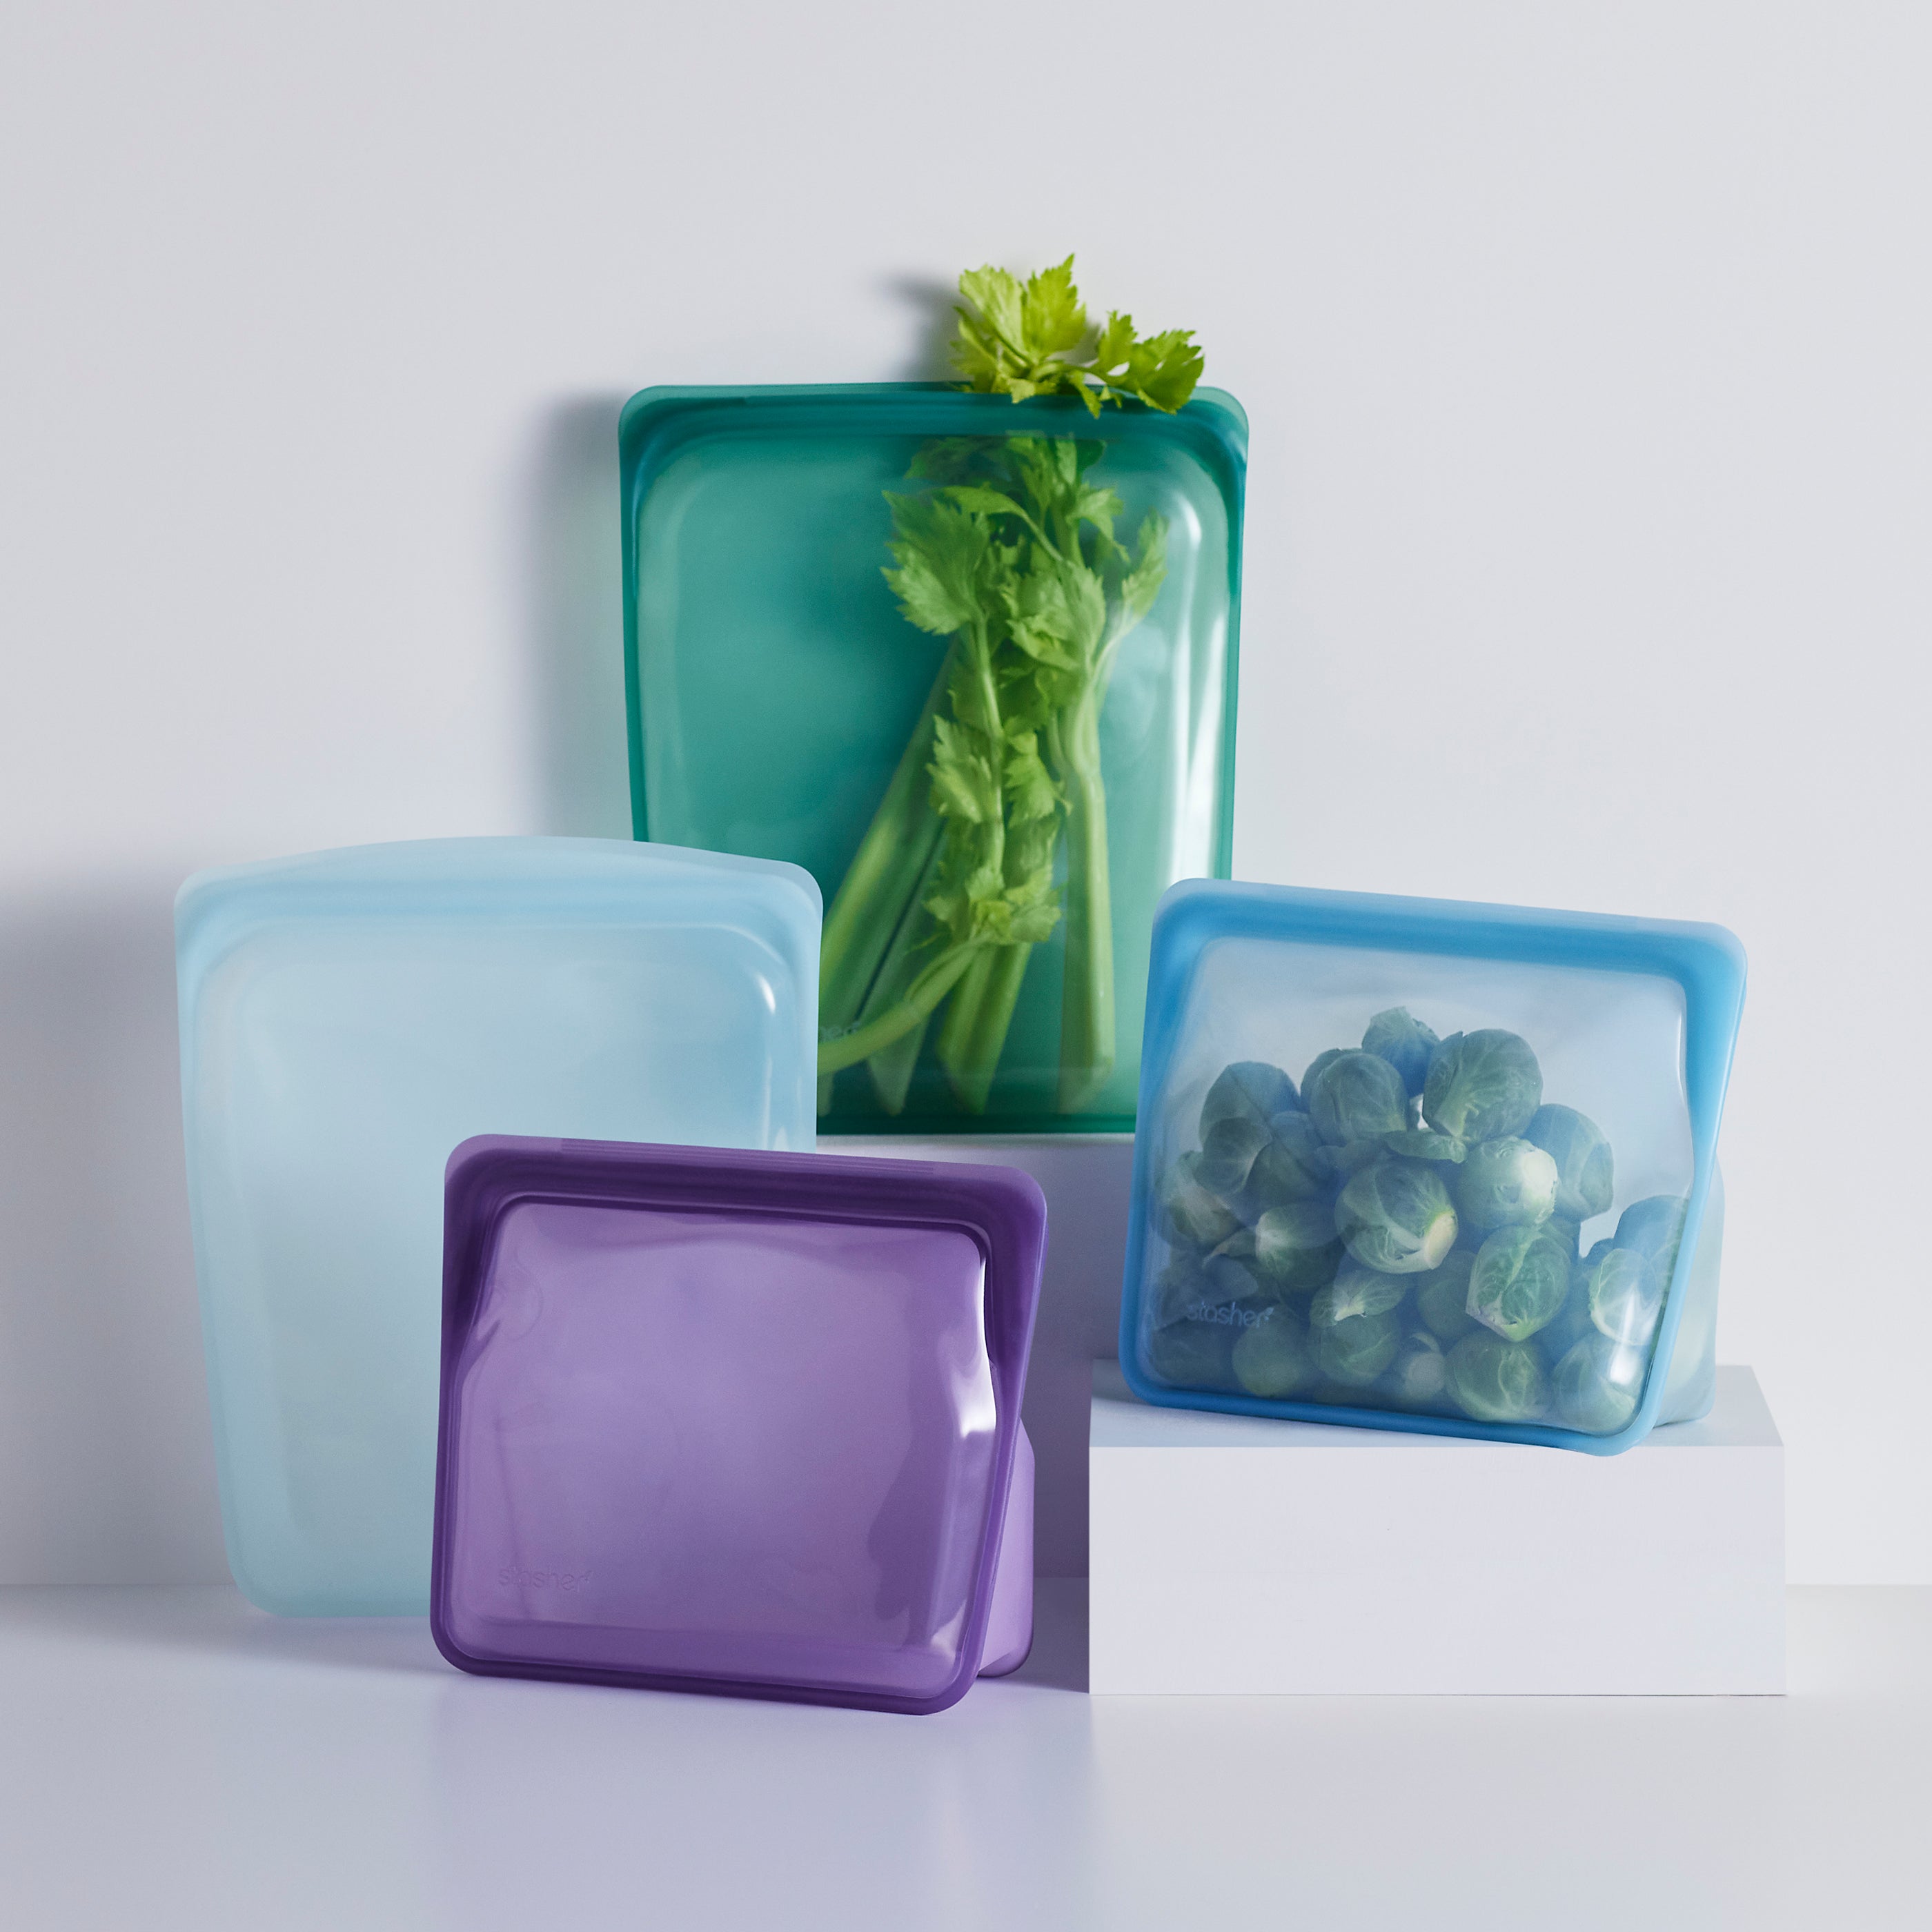 ocean forest: Reusable Silicone Stasher Bag Food Storage 4-Pack Assorted Colours